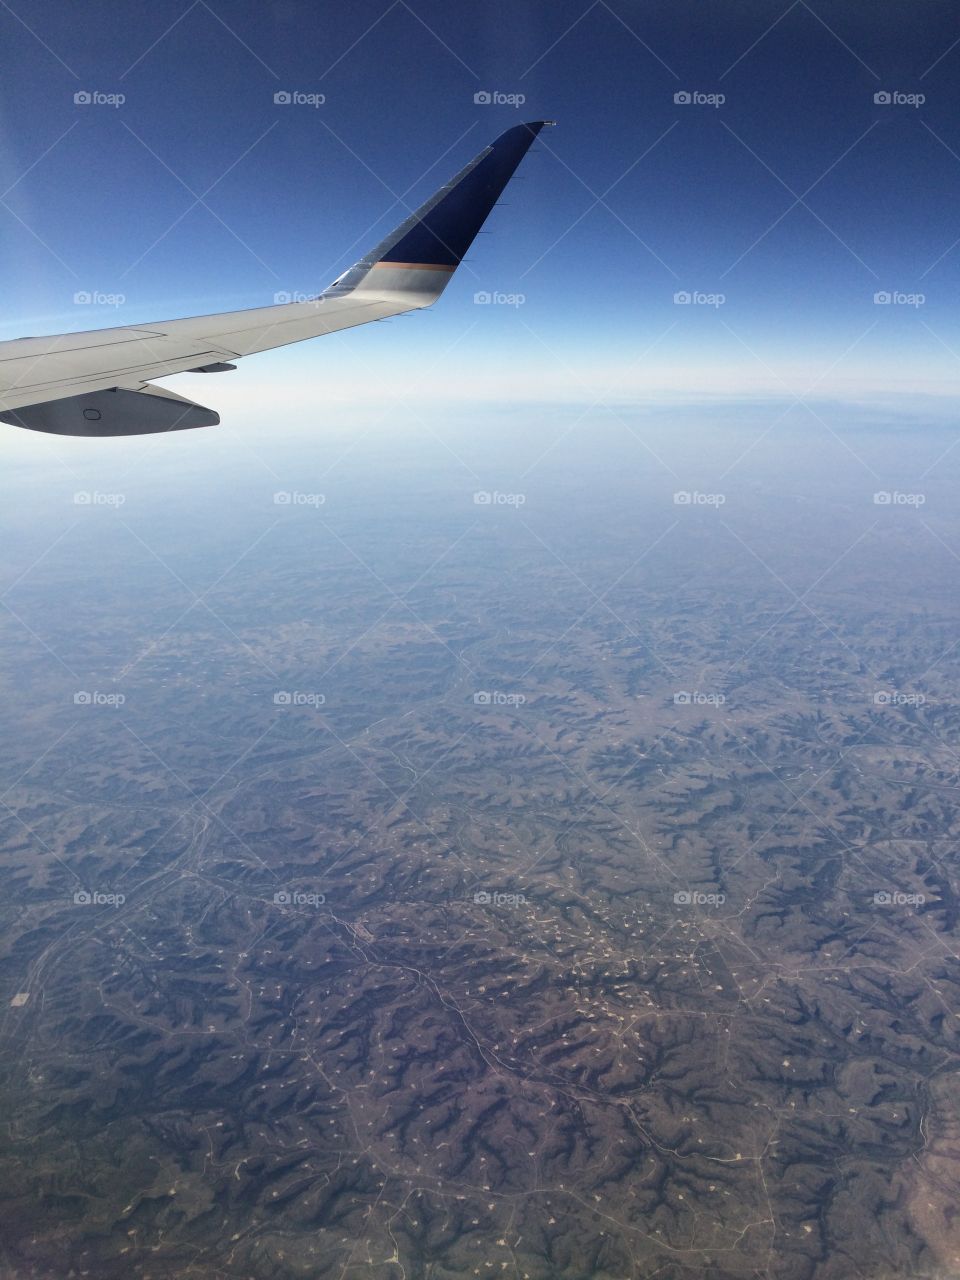 Flying over oil country